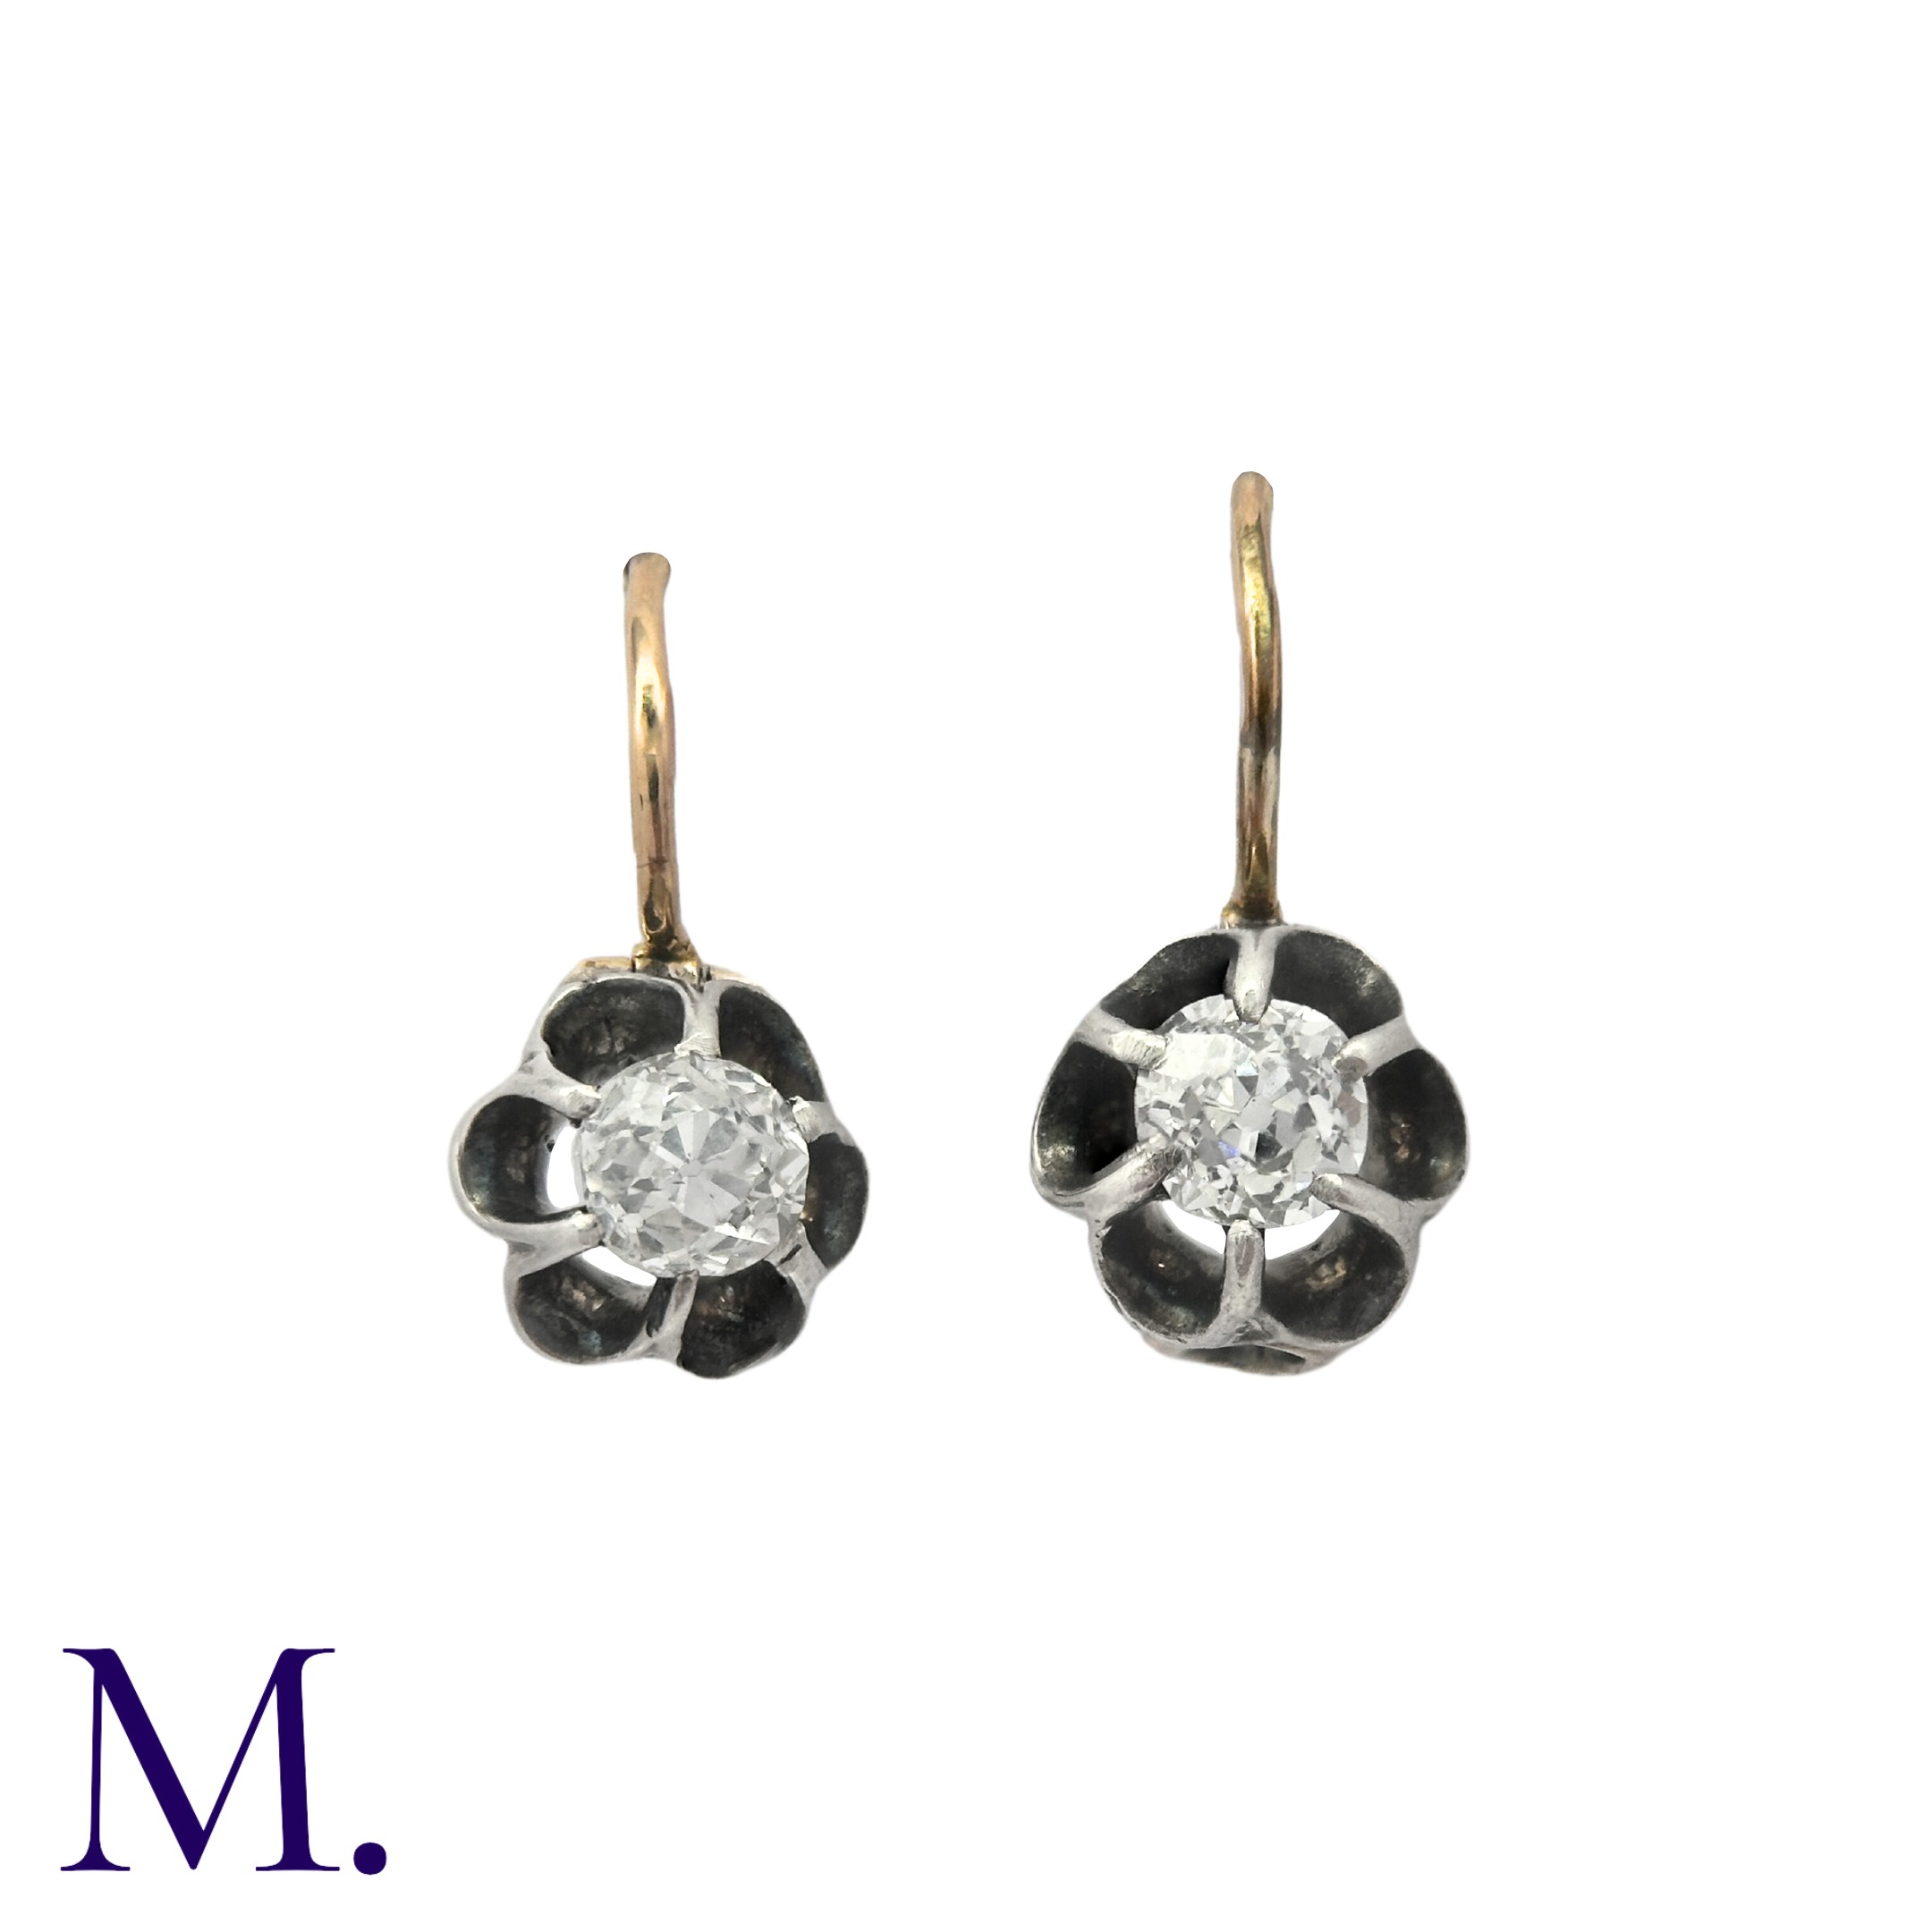 A Pair of Antique Old Cut Diamond Earrings in yellow gold and silver, each comprising an old cut